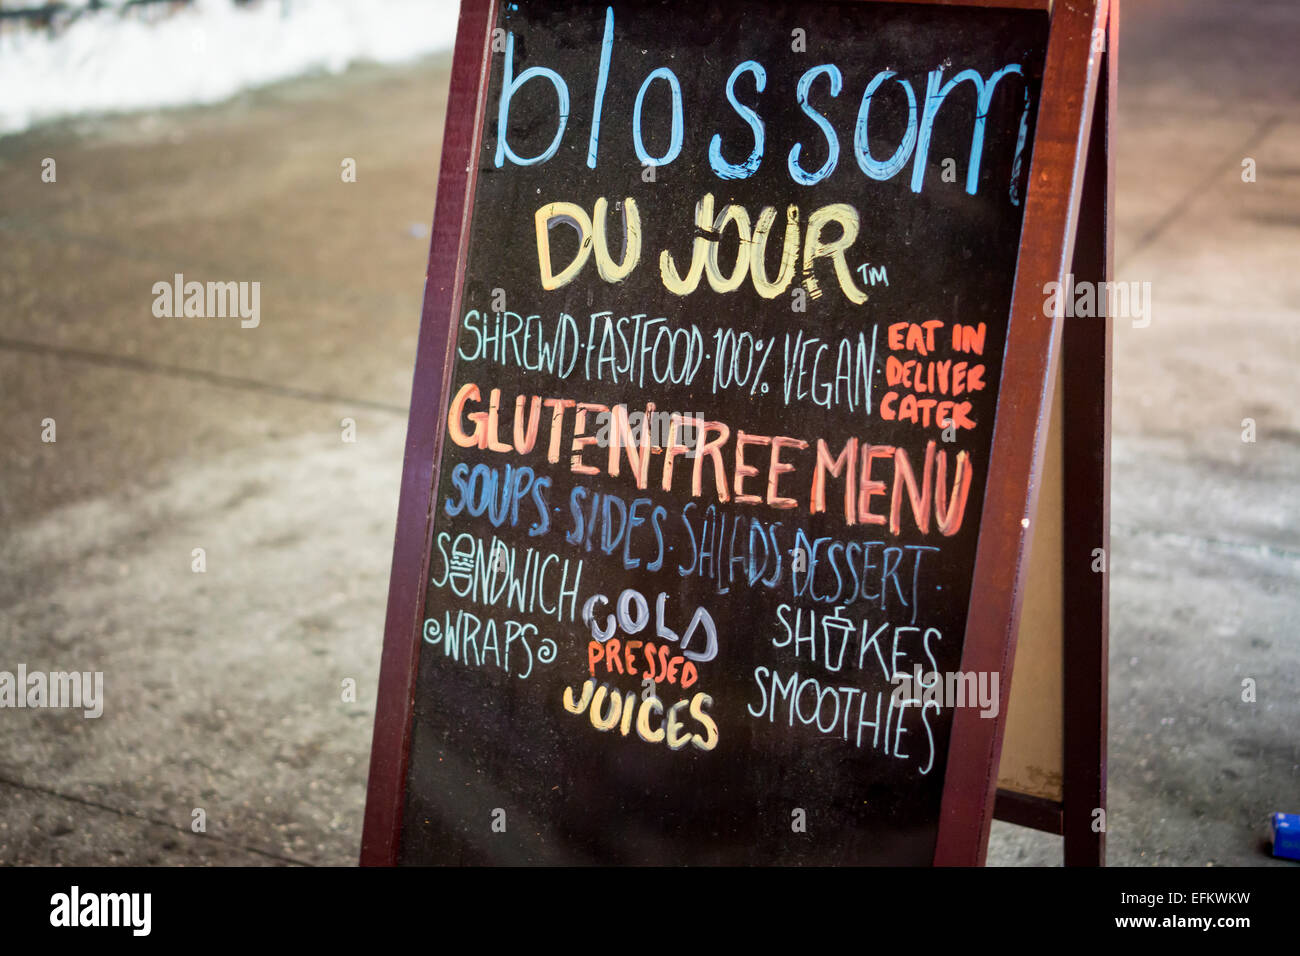 A sign outside of a the Blossom du Jour restaurant in New York on Tuesday, February 3, 2015 promotes their vegan and gluten-free menu. The protein gluten is found in wheat and is a flavoring and thickening food additive. People with celiac disease, dermatitis herpetiformis  and wheat allergies eat a gluten-free diet to prevent their disease or allergy. (© Richard B. Levine) Stock Photo